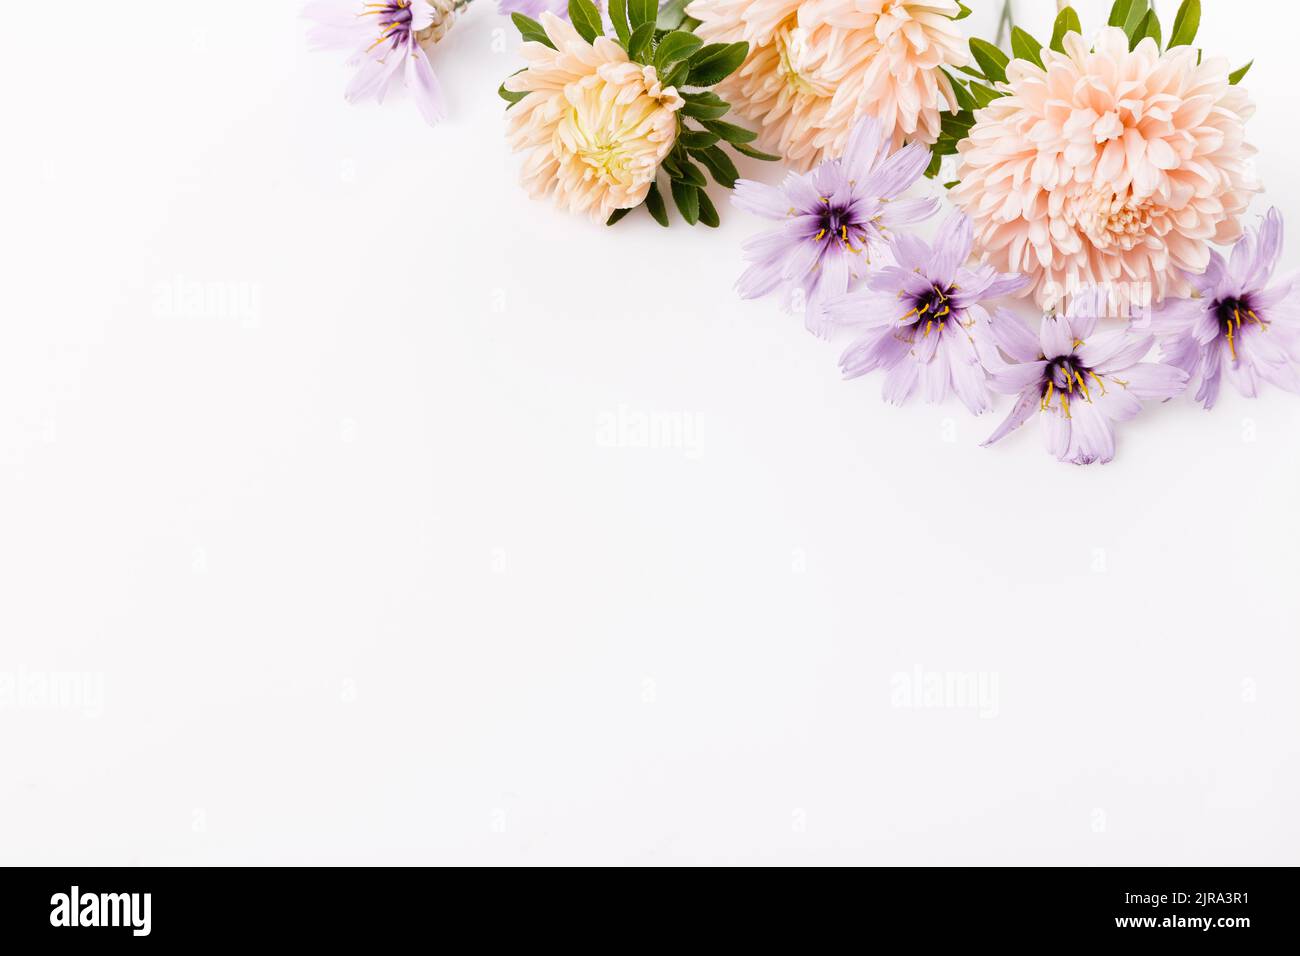 Autumn frame of dusty aster and dry blue flowers, floral composition isolated on white background. Top view with copy space Stock Photo